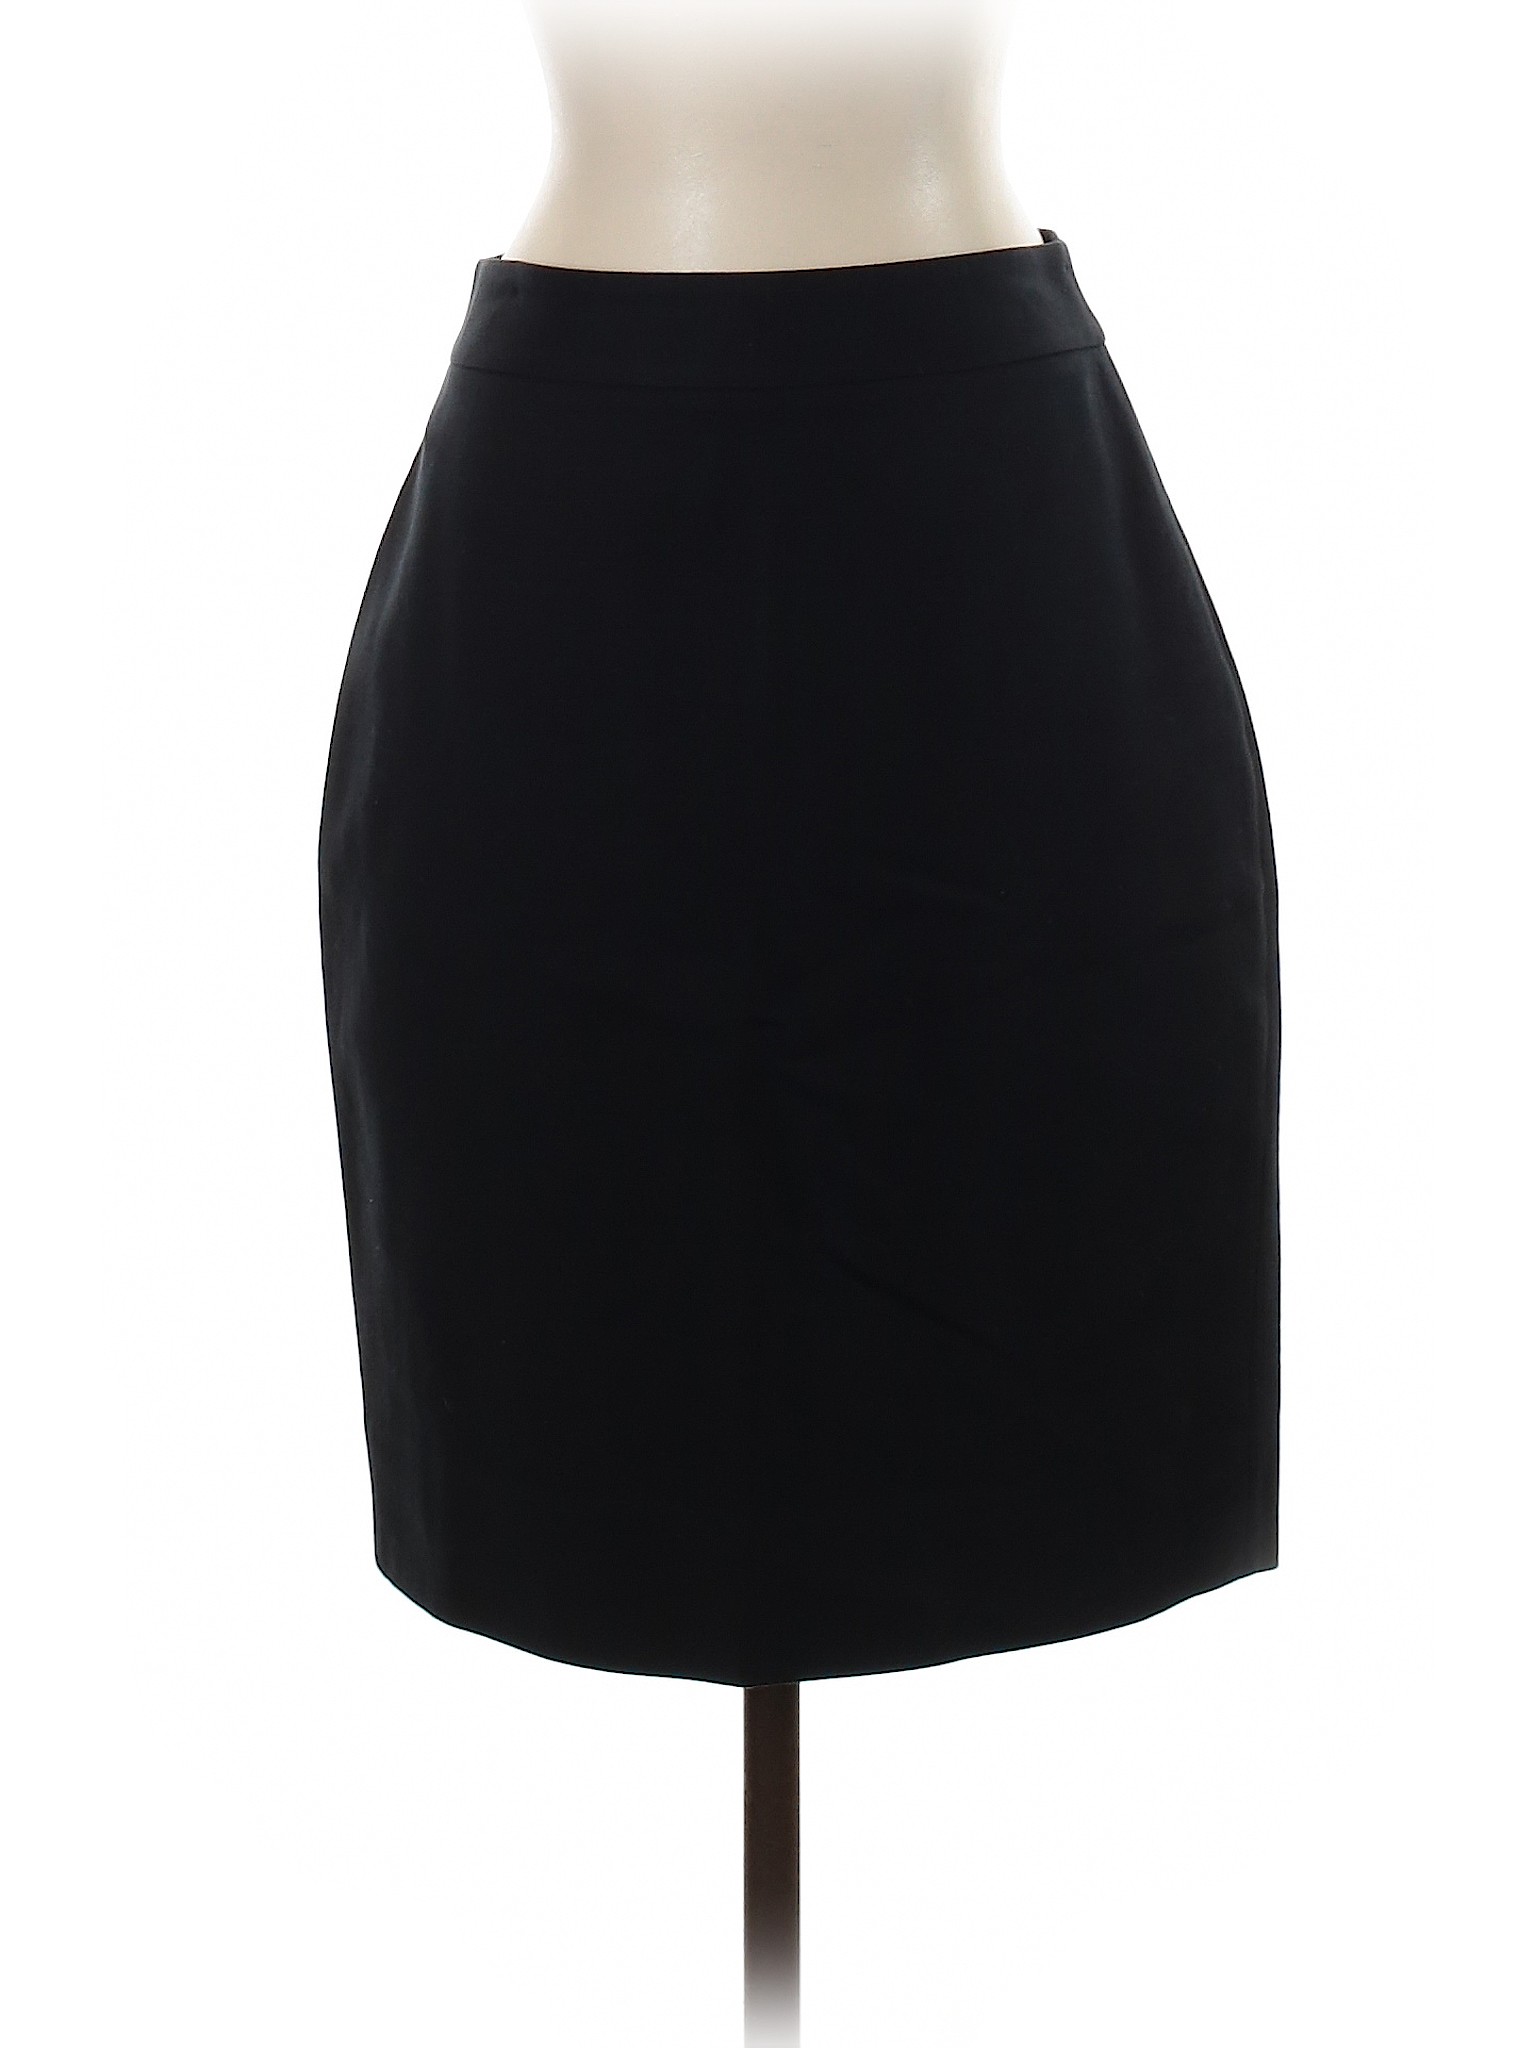 Kate Spade New York Solid Black Casual Skirt Size 2 - 82% off | thredUP